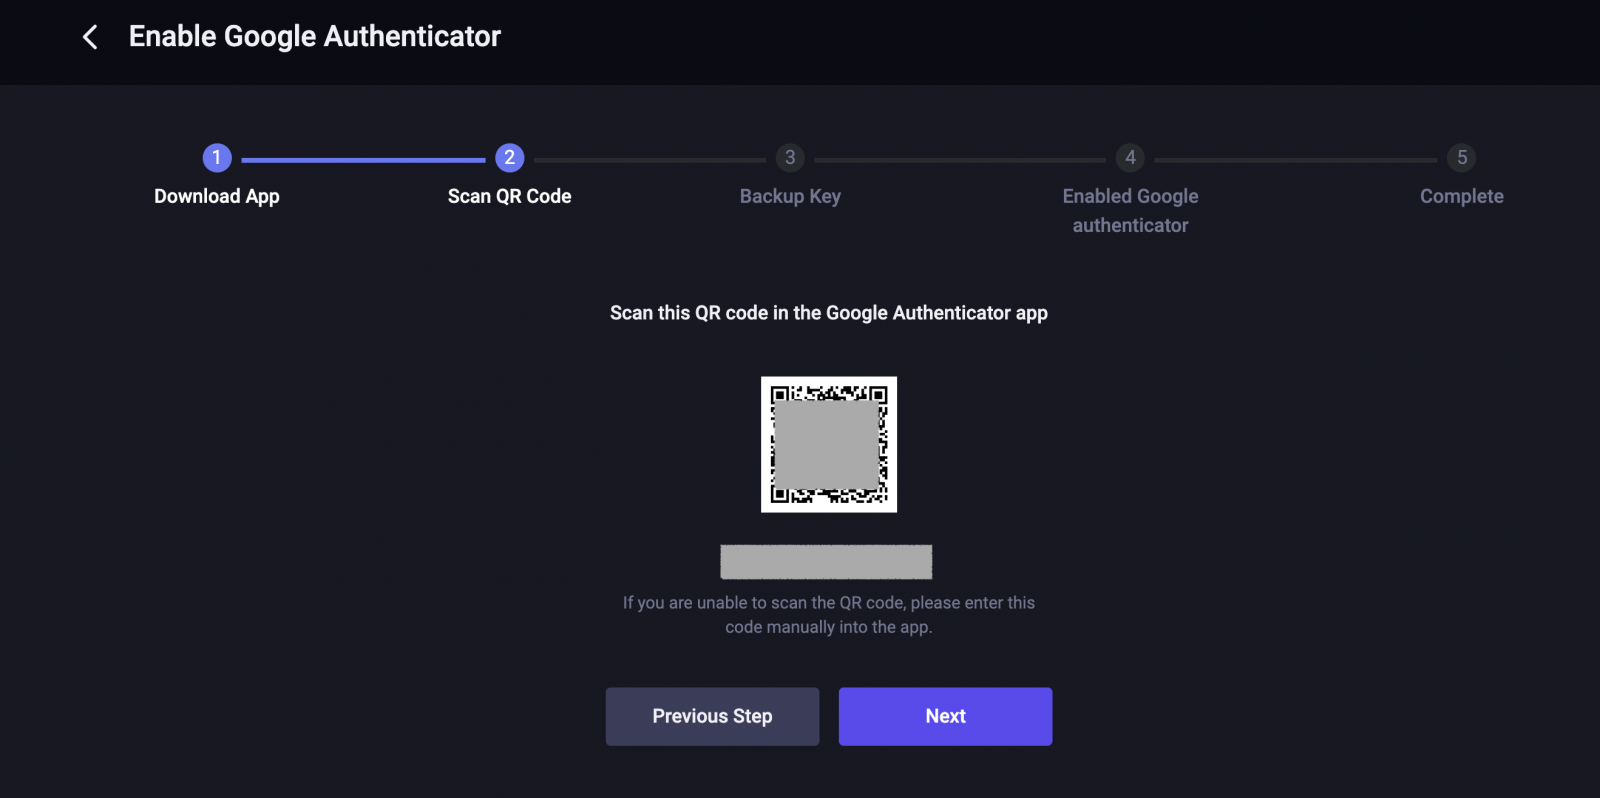 How to Verify Account in ApolloX